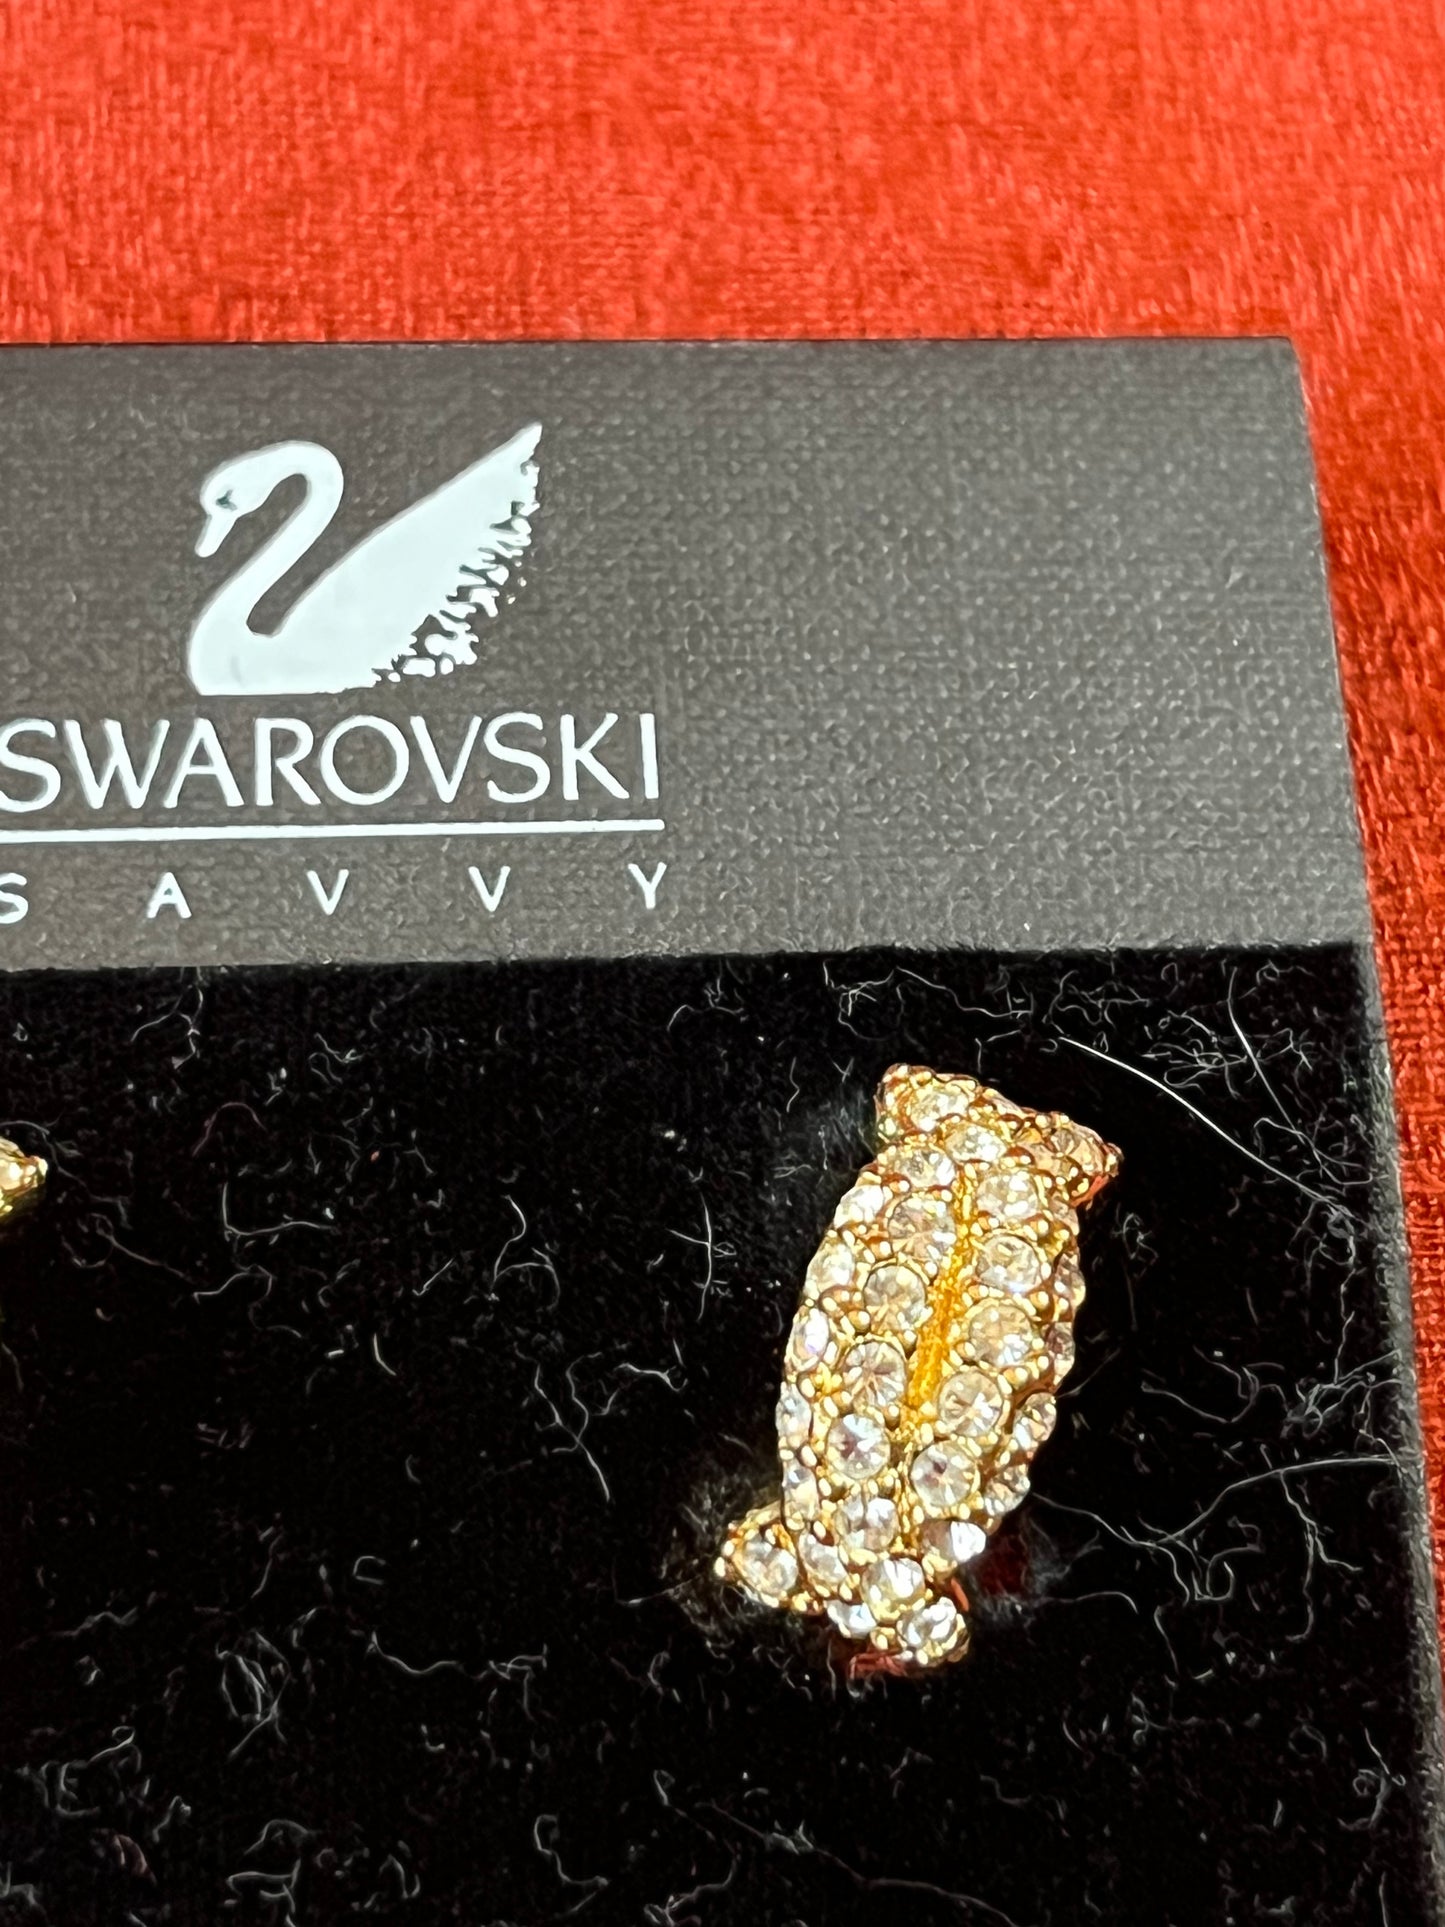 Vintage Swarovski Savvy Gold Tone and Crystal Clip On Earrings-New